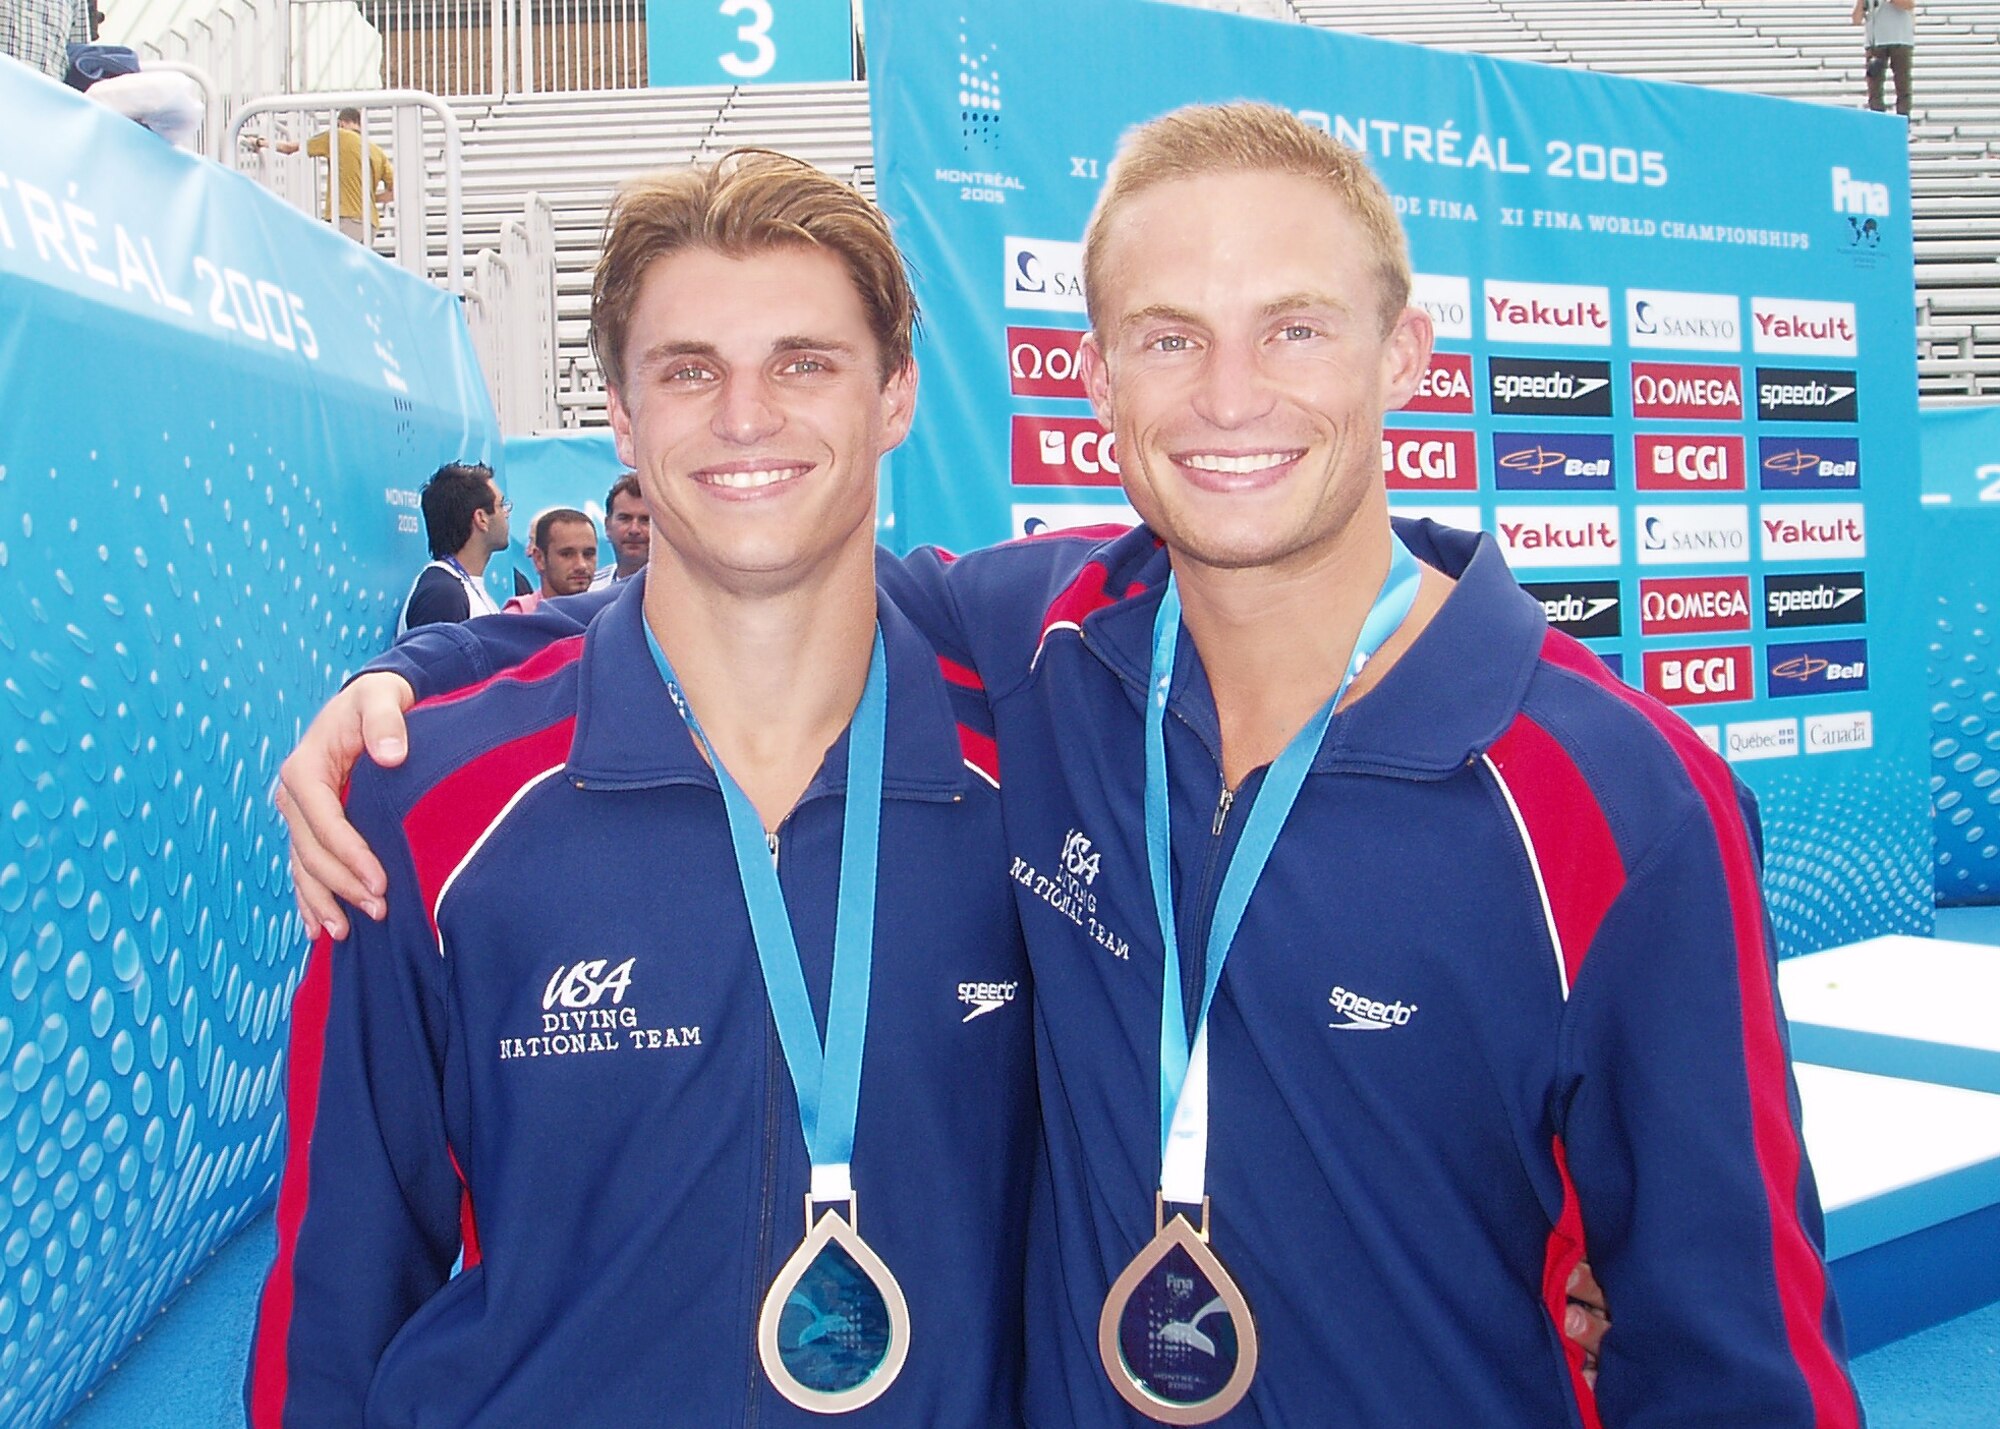 1st Lt. Justin Dumais, student F-16 pilot assigned to 310th Fighter Squadron, stands with his brother, Troy, at the 2005 World Championships in Montreal. The brothers completed in the 3-meter men's syncronized dive and earned a bronze medal. Troy (left) competed in the 2008 Beijing Olympics. (courtesy photo)